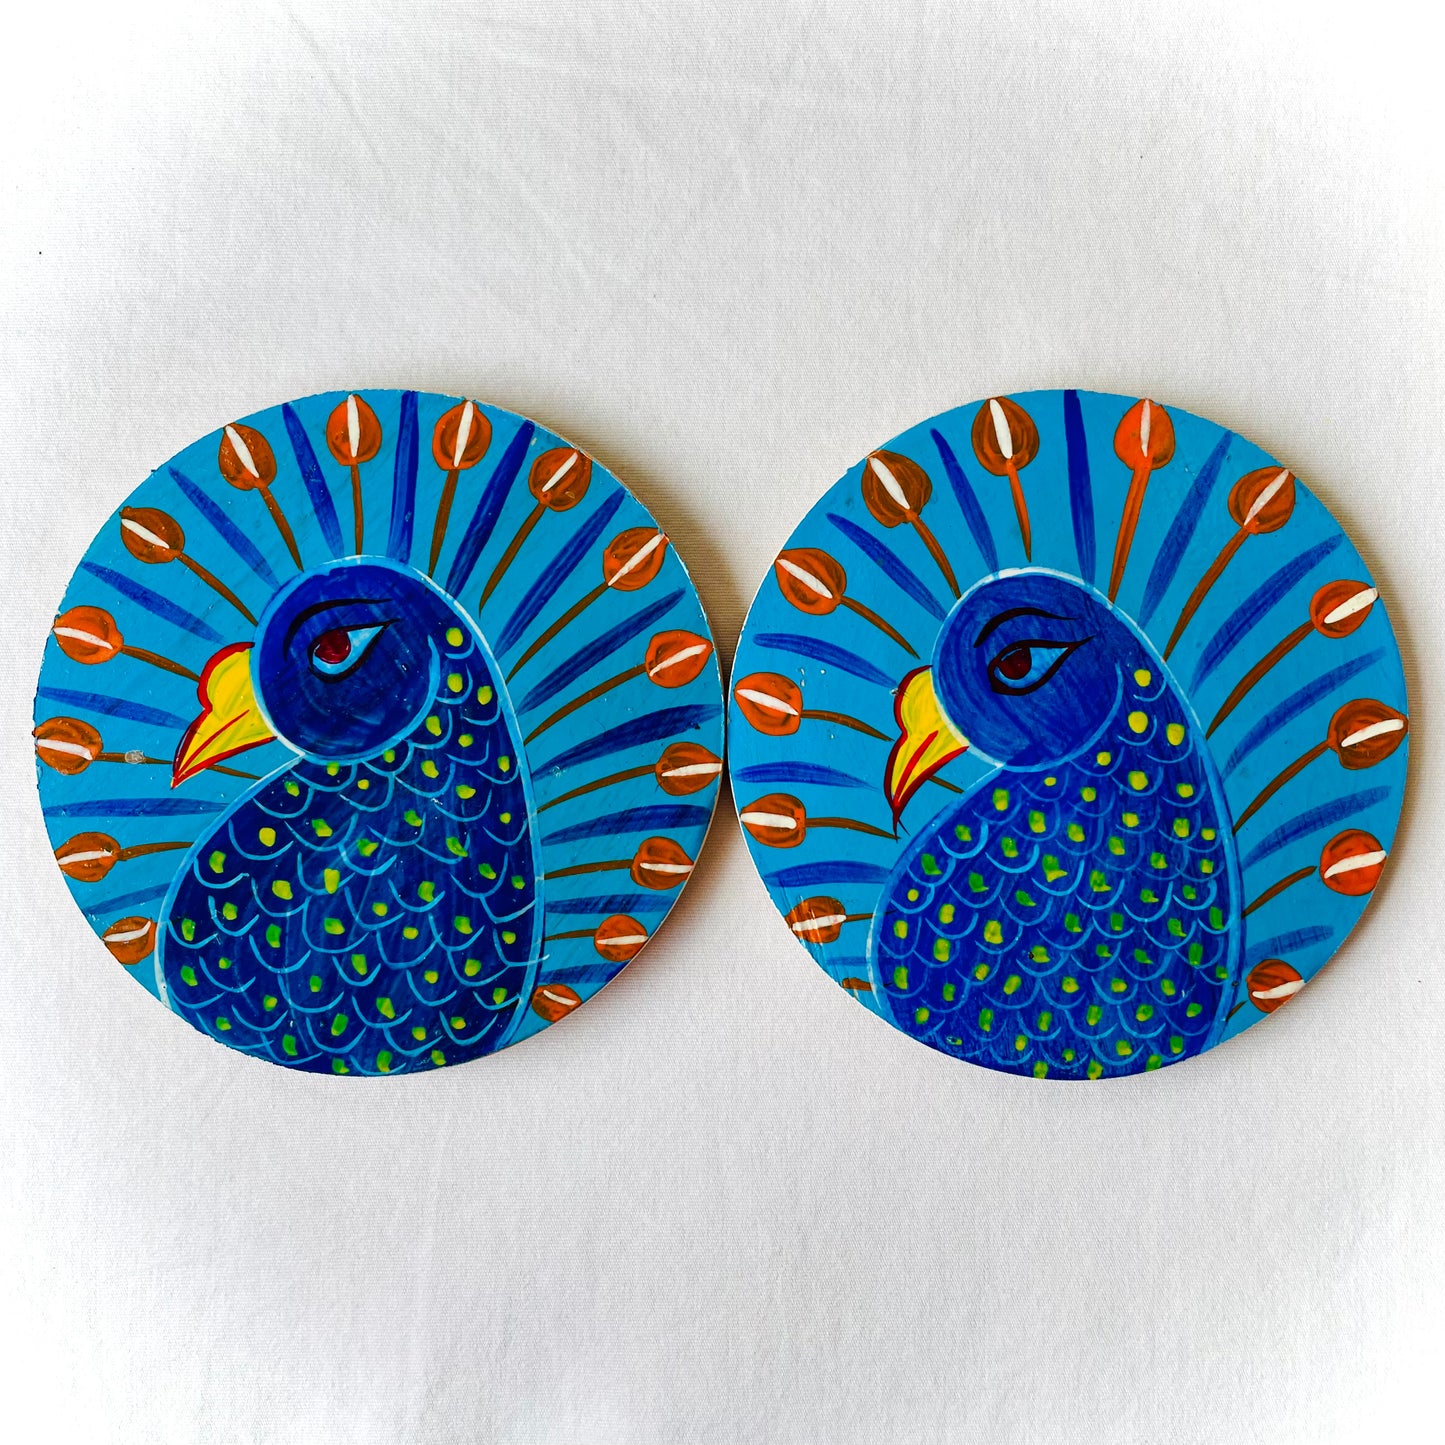 Alokya - 100% natural, Pattachitra painted terracotta coasters - Round coasters: blue bird painted on the surface.